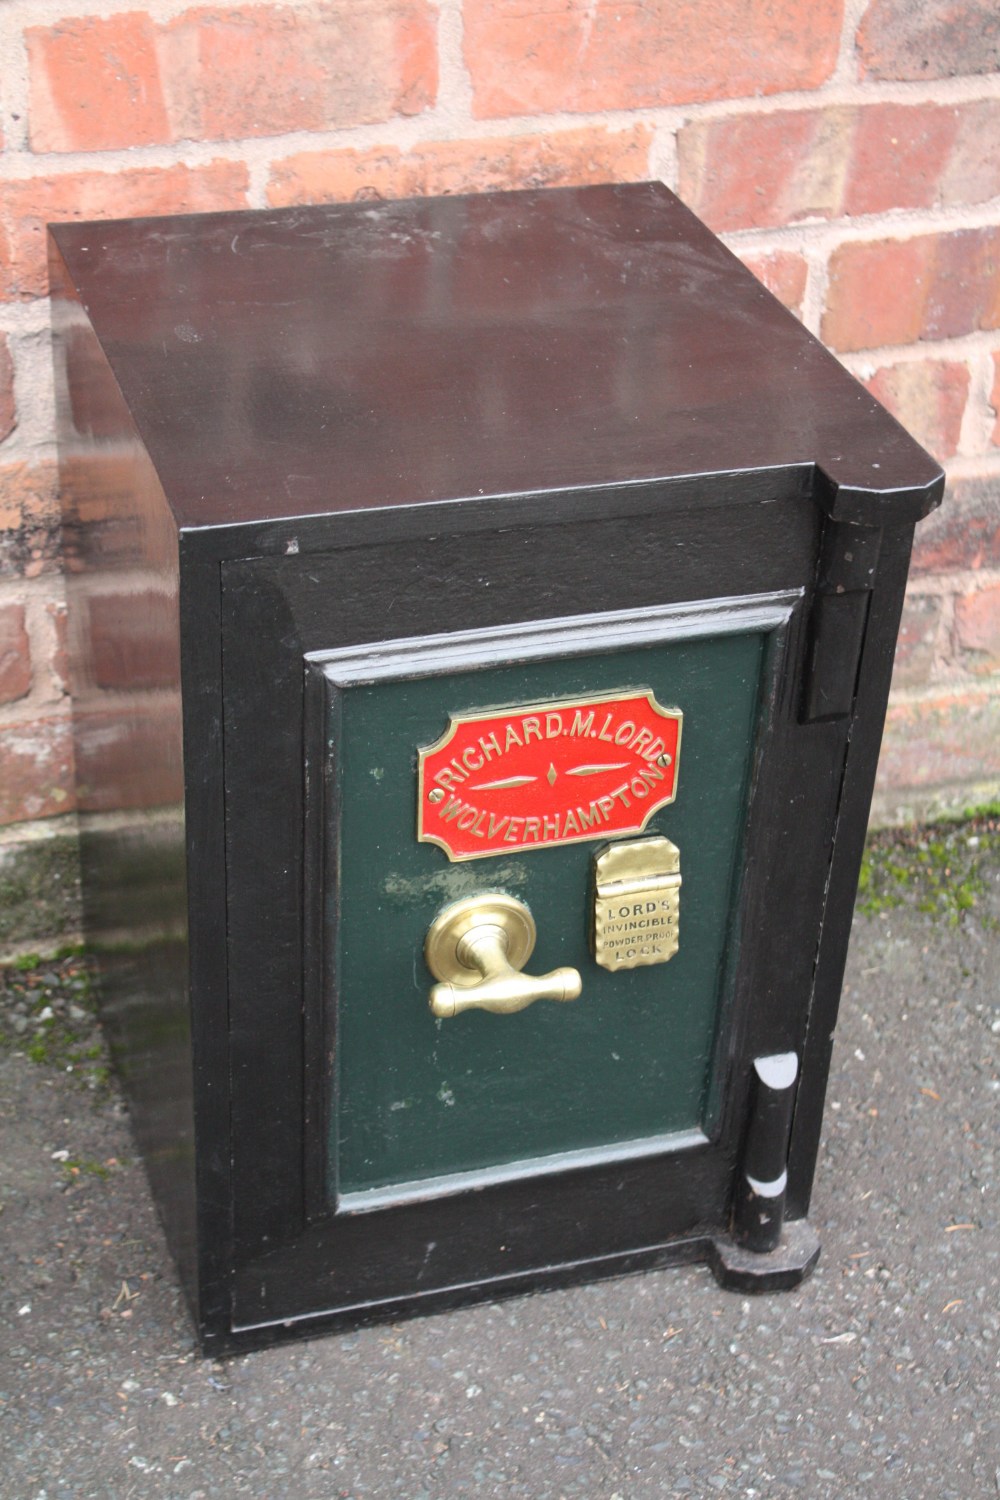 A SMALL CAST SAFE BY RICHARD M LORD - WOLVERHAMPTON, with key, H 57 cm, W 36 cm